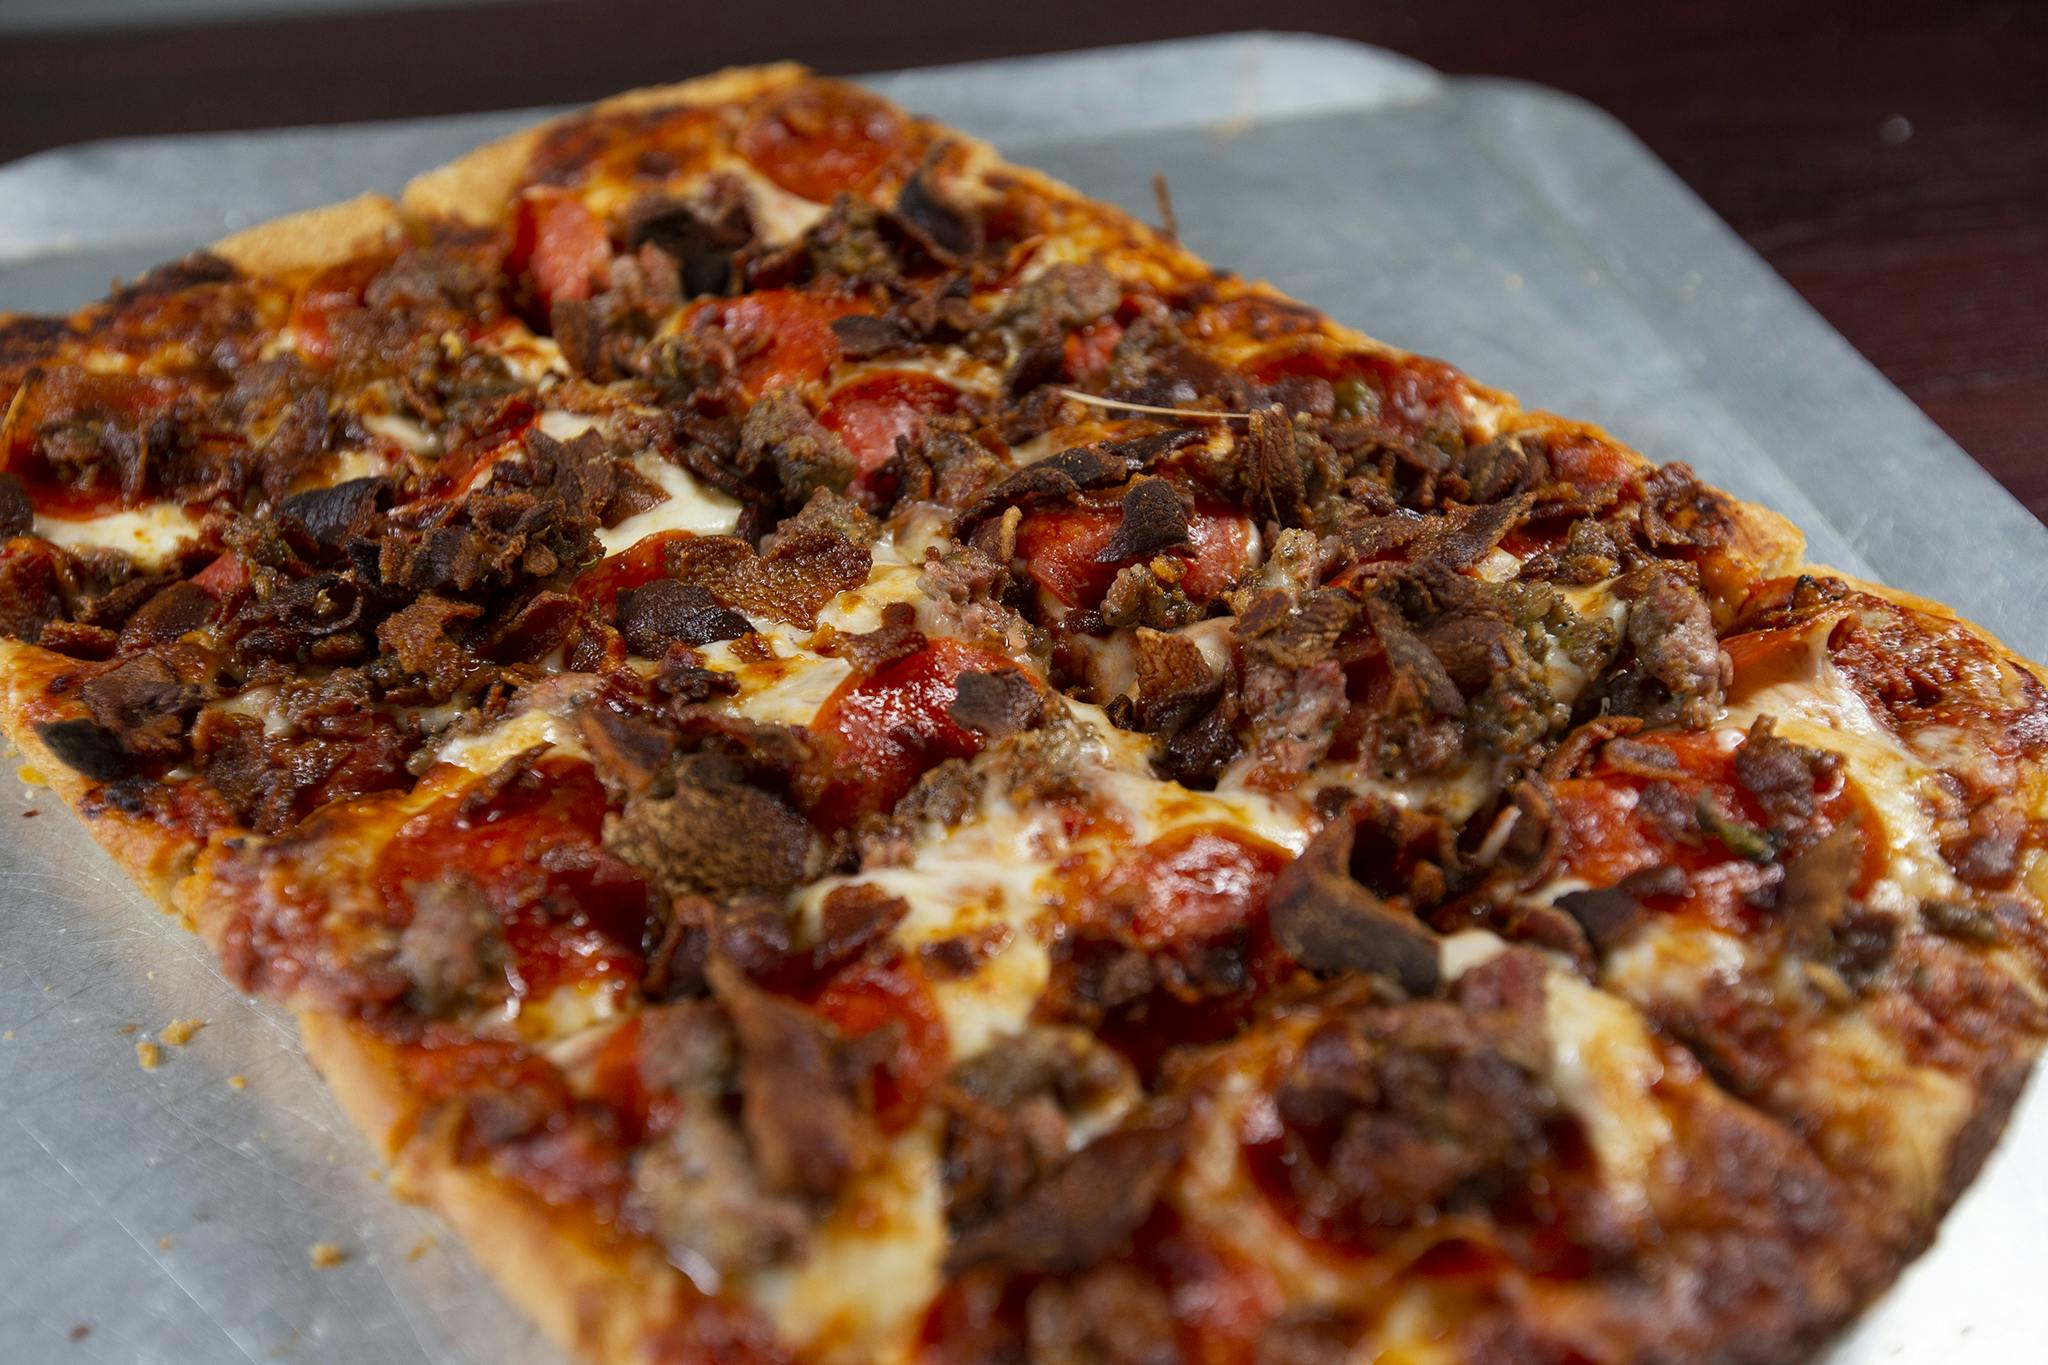 Meat Lovers Pizza. from Firehouse Grill - Chicago Ave in Evanston, IL